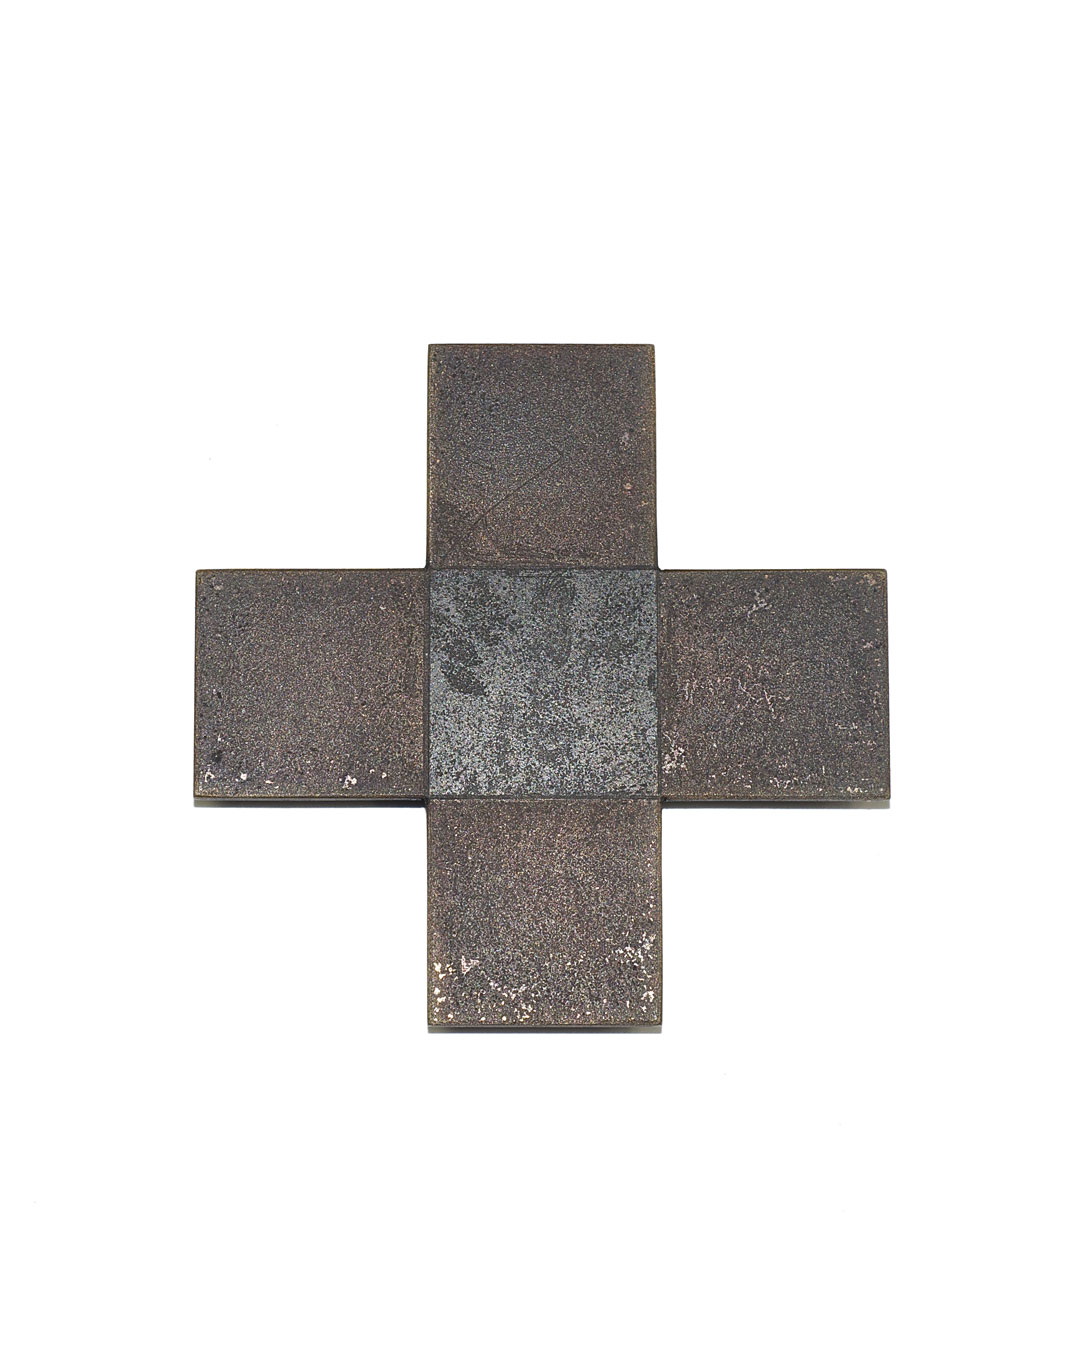 Tore Svensson, Cross , 2010, brooch; etched steel, partly gilt, 60 x 60 x 1.5 mm, €365